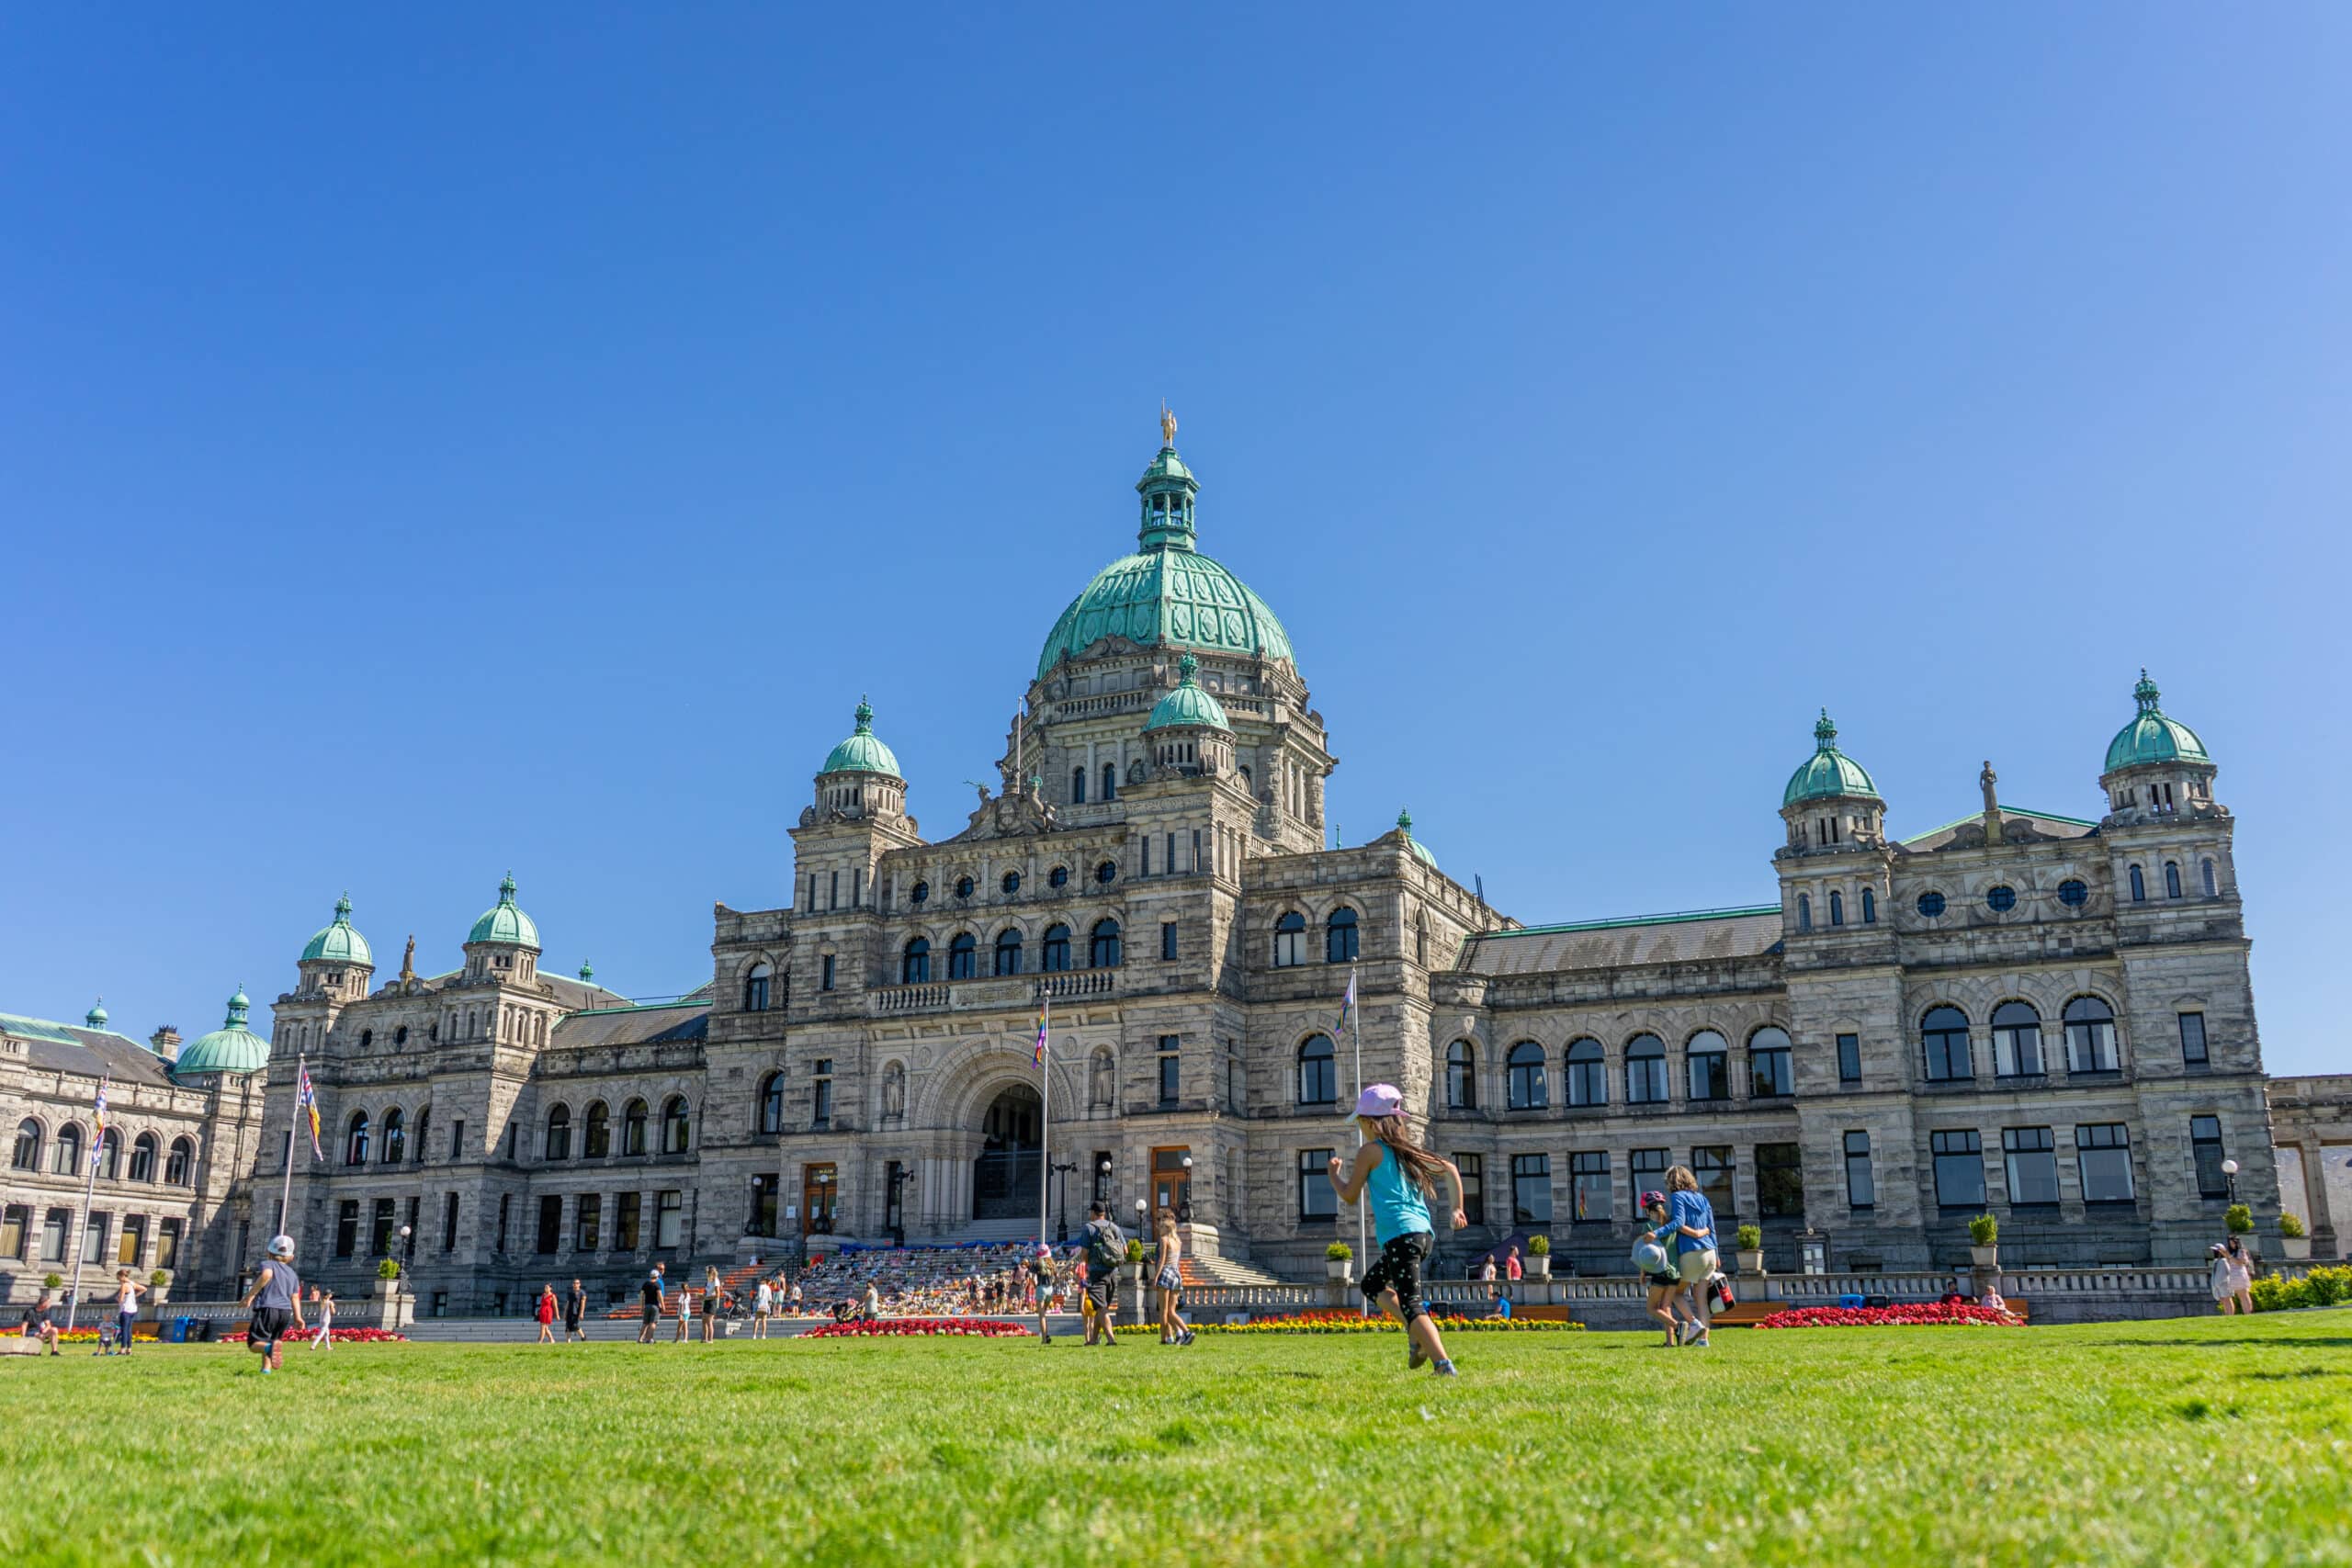 https://www.discovercanadatours.com/wp-content/uploads/2022/10/©Lisanne_Smeele_Victoria_SightSeeing-21-scaled.jpg